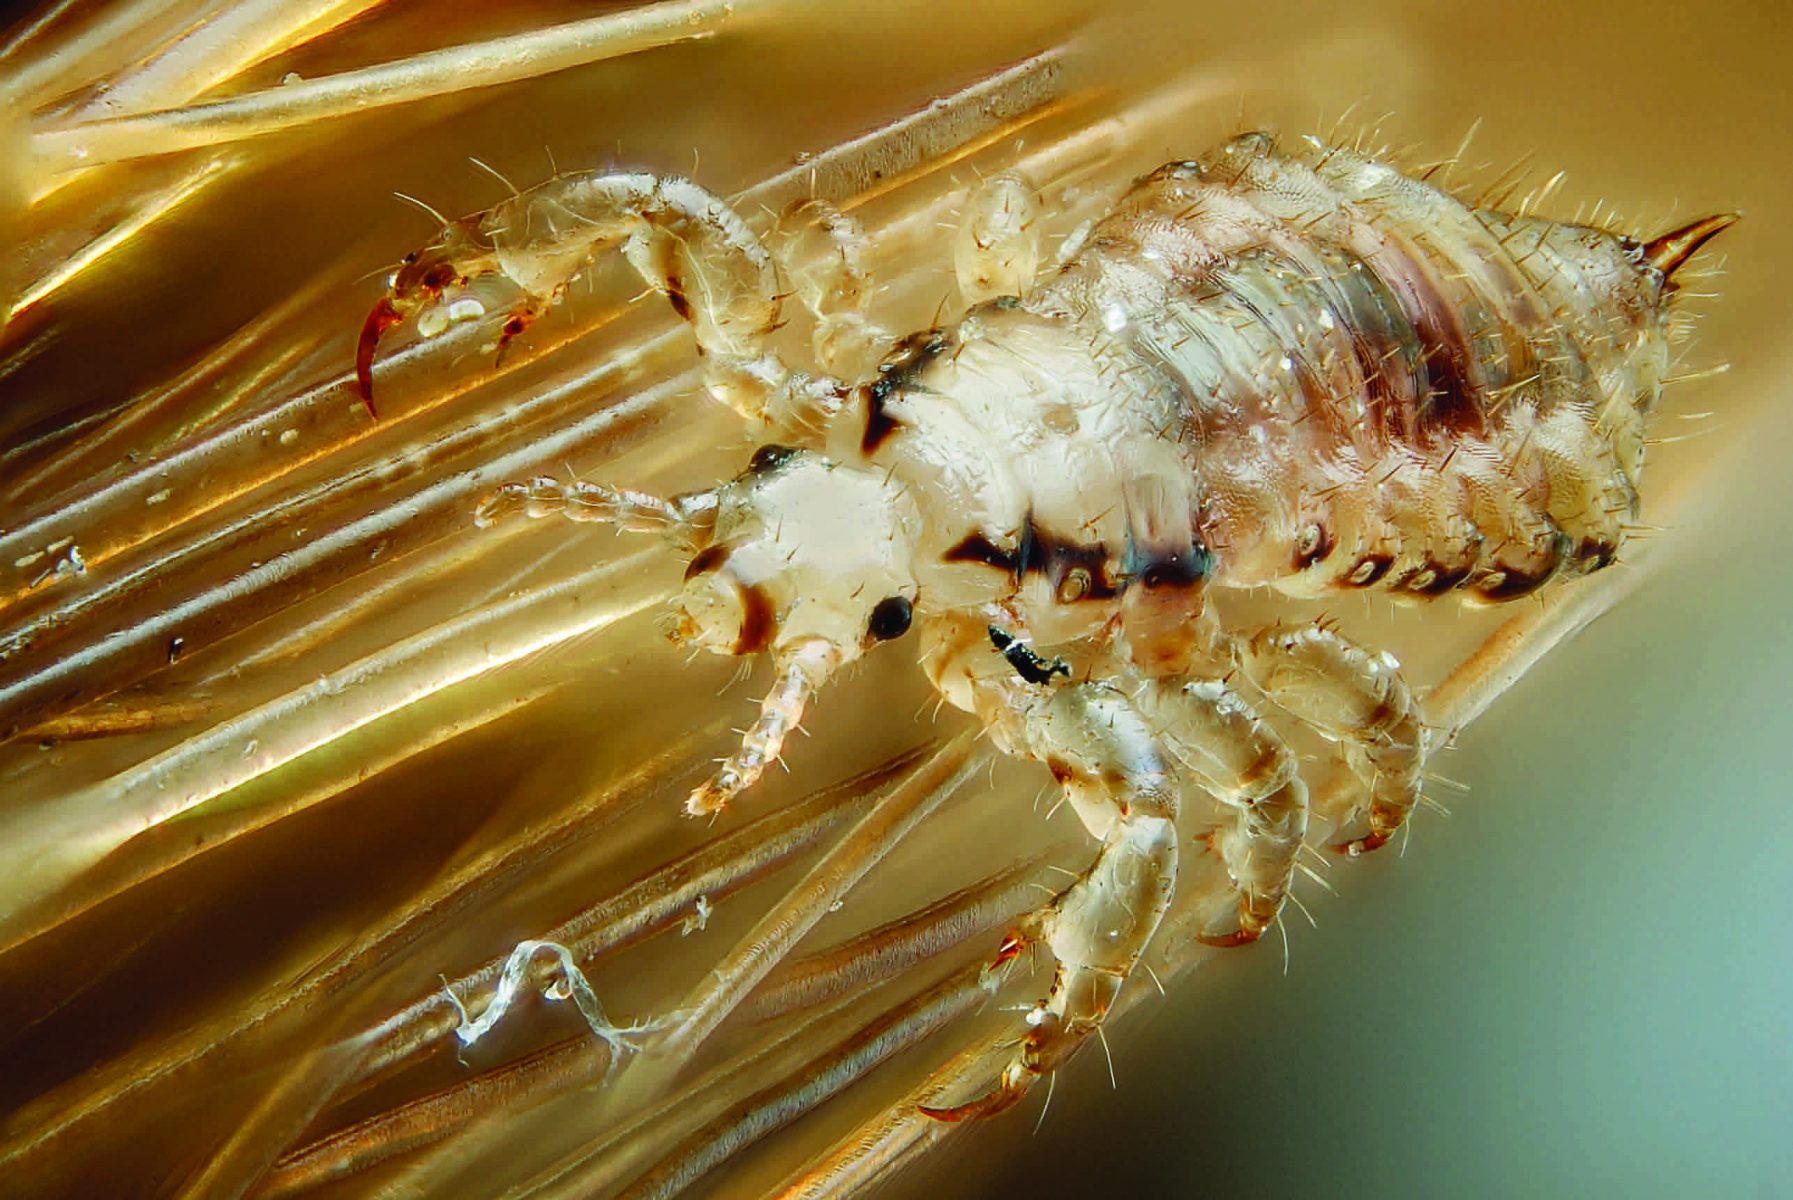 Dealing With Lice: A Local Resource Guide - NW Kids Magazine